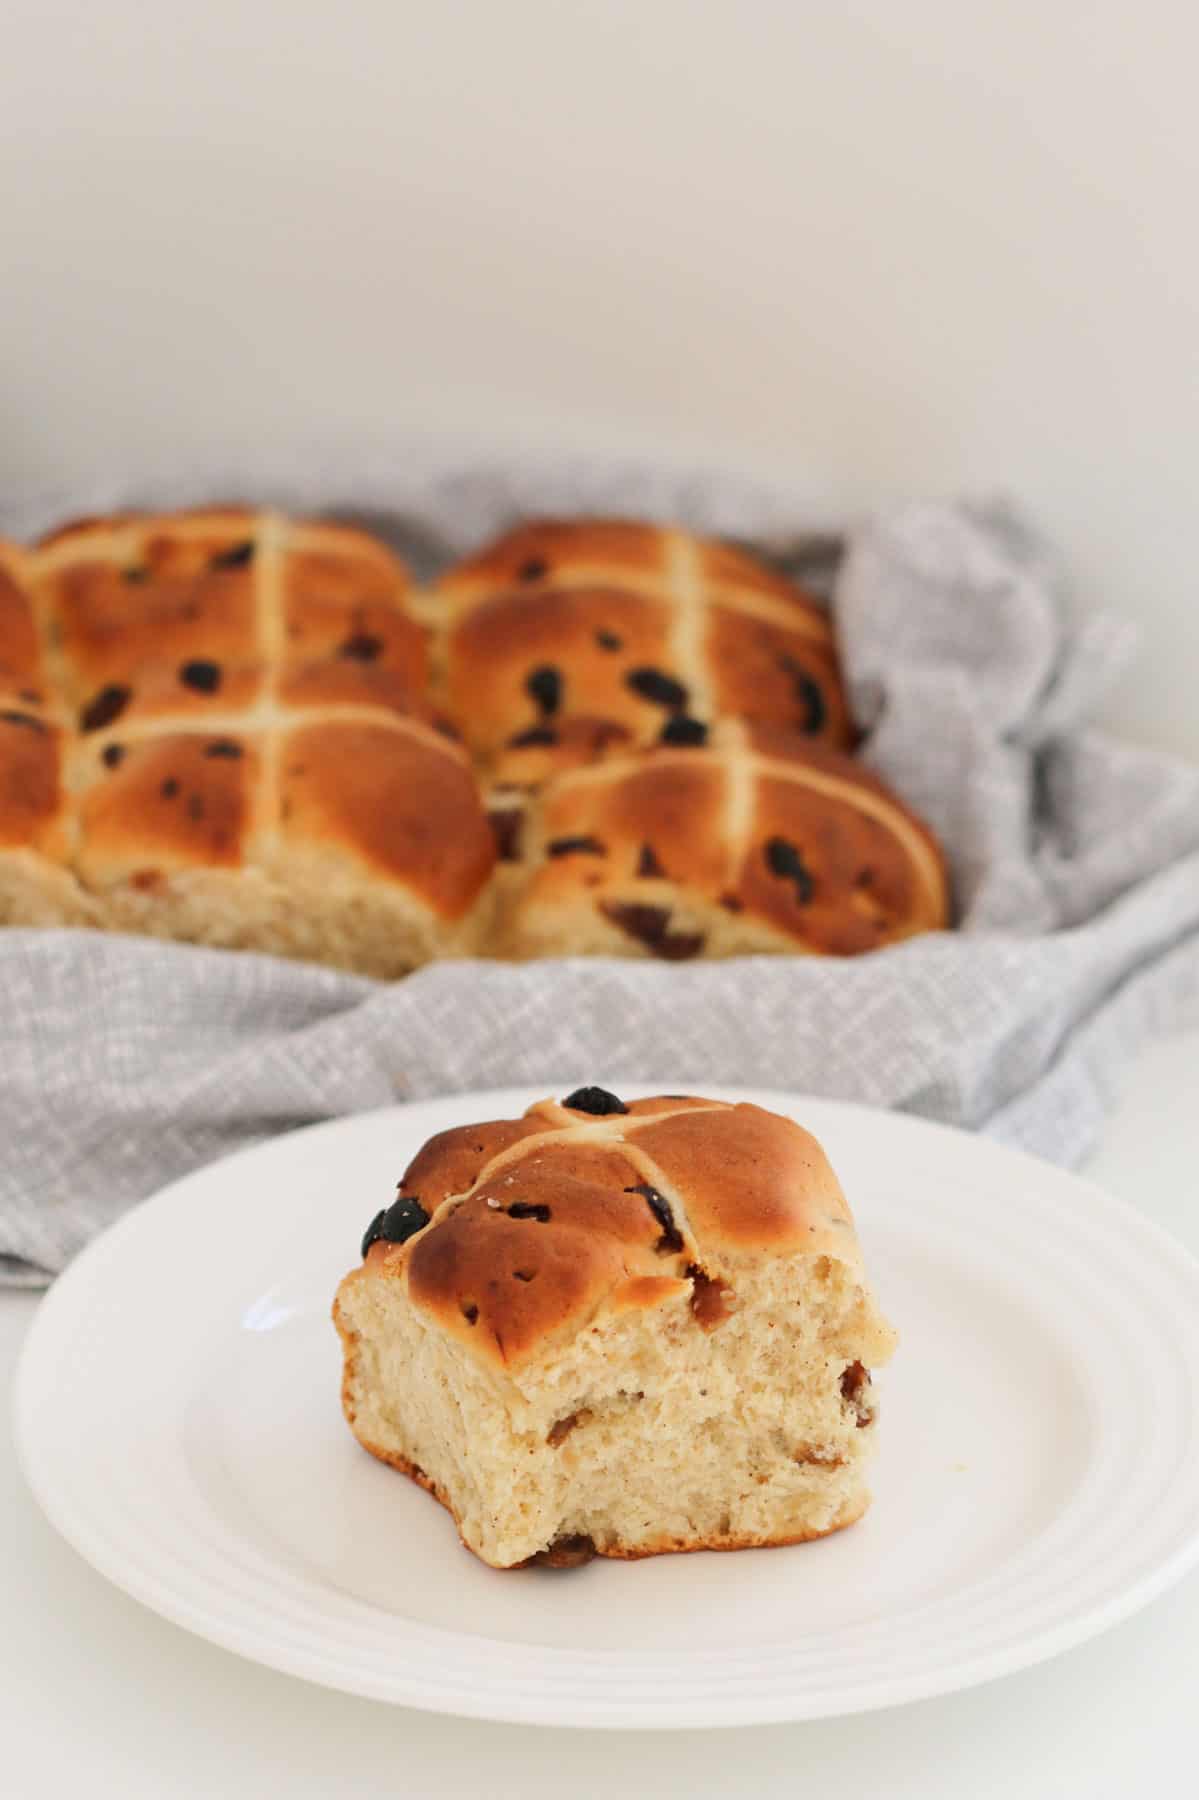 A hot cross bun on a white plate with a batch of buns in the background.